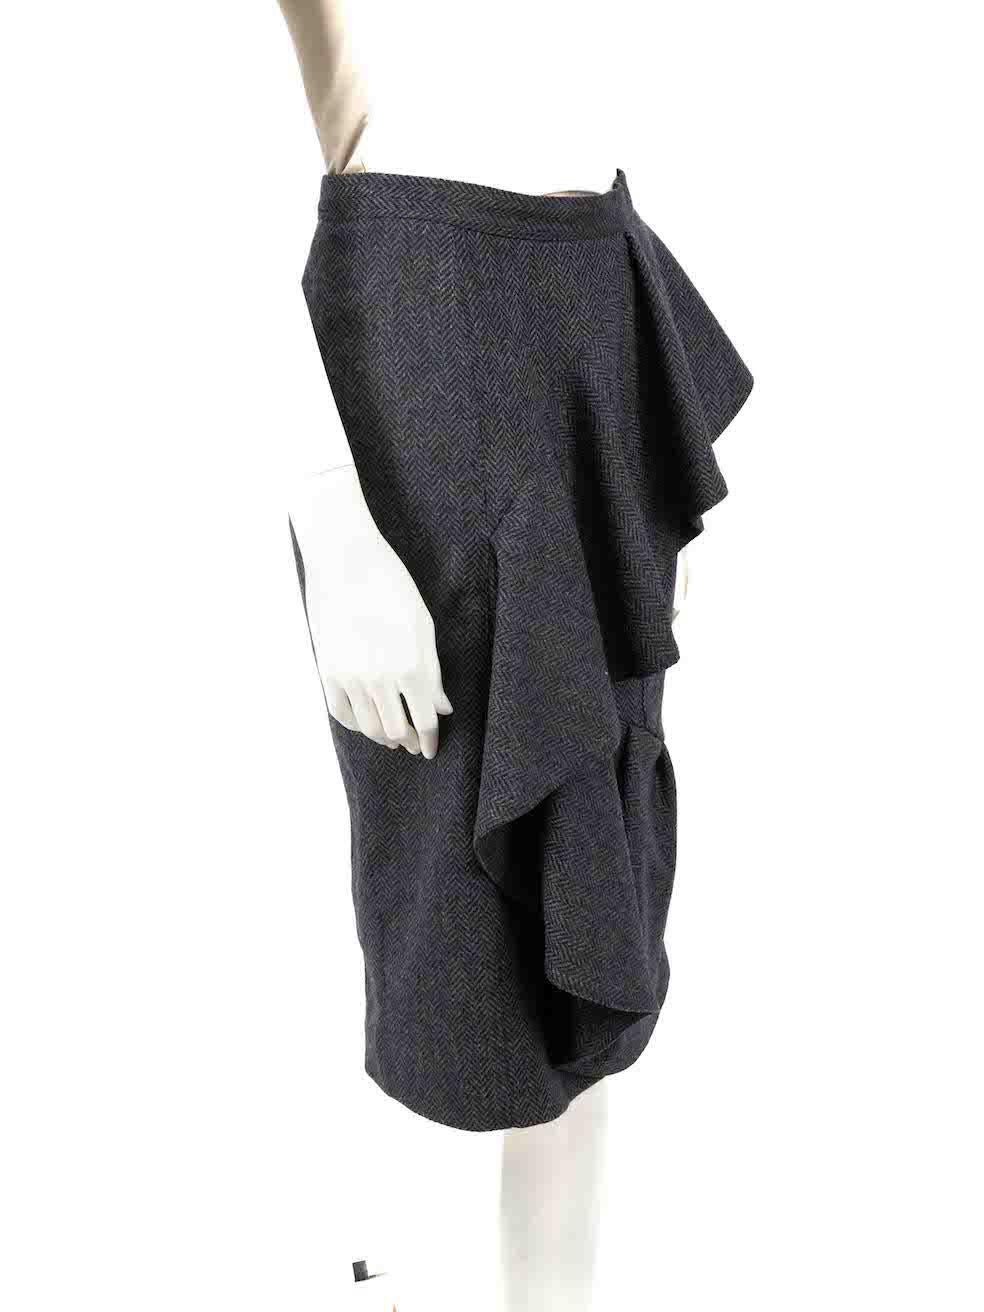 CONDITION is Very good. Hardly any visible wear to skirt is evident on this used Burberry Prorsum designer resale item.
 
 
 
 Details
 
 
 Navy
 
 Wool
 
 Skirt
 
 Herringbone
 
 Ruffle accent
 
 Knee length
 
 Back zip fastening
 
 
 
 
 
 Made in